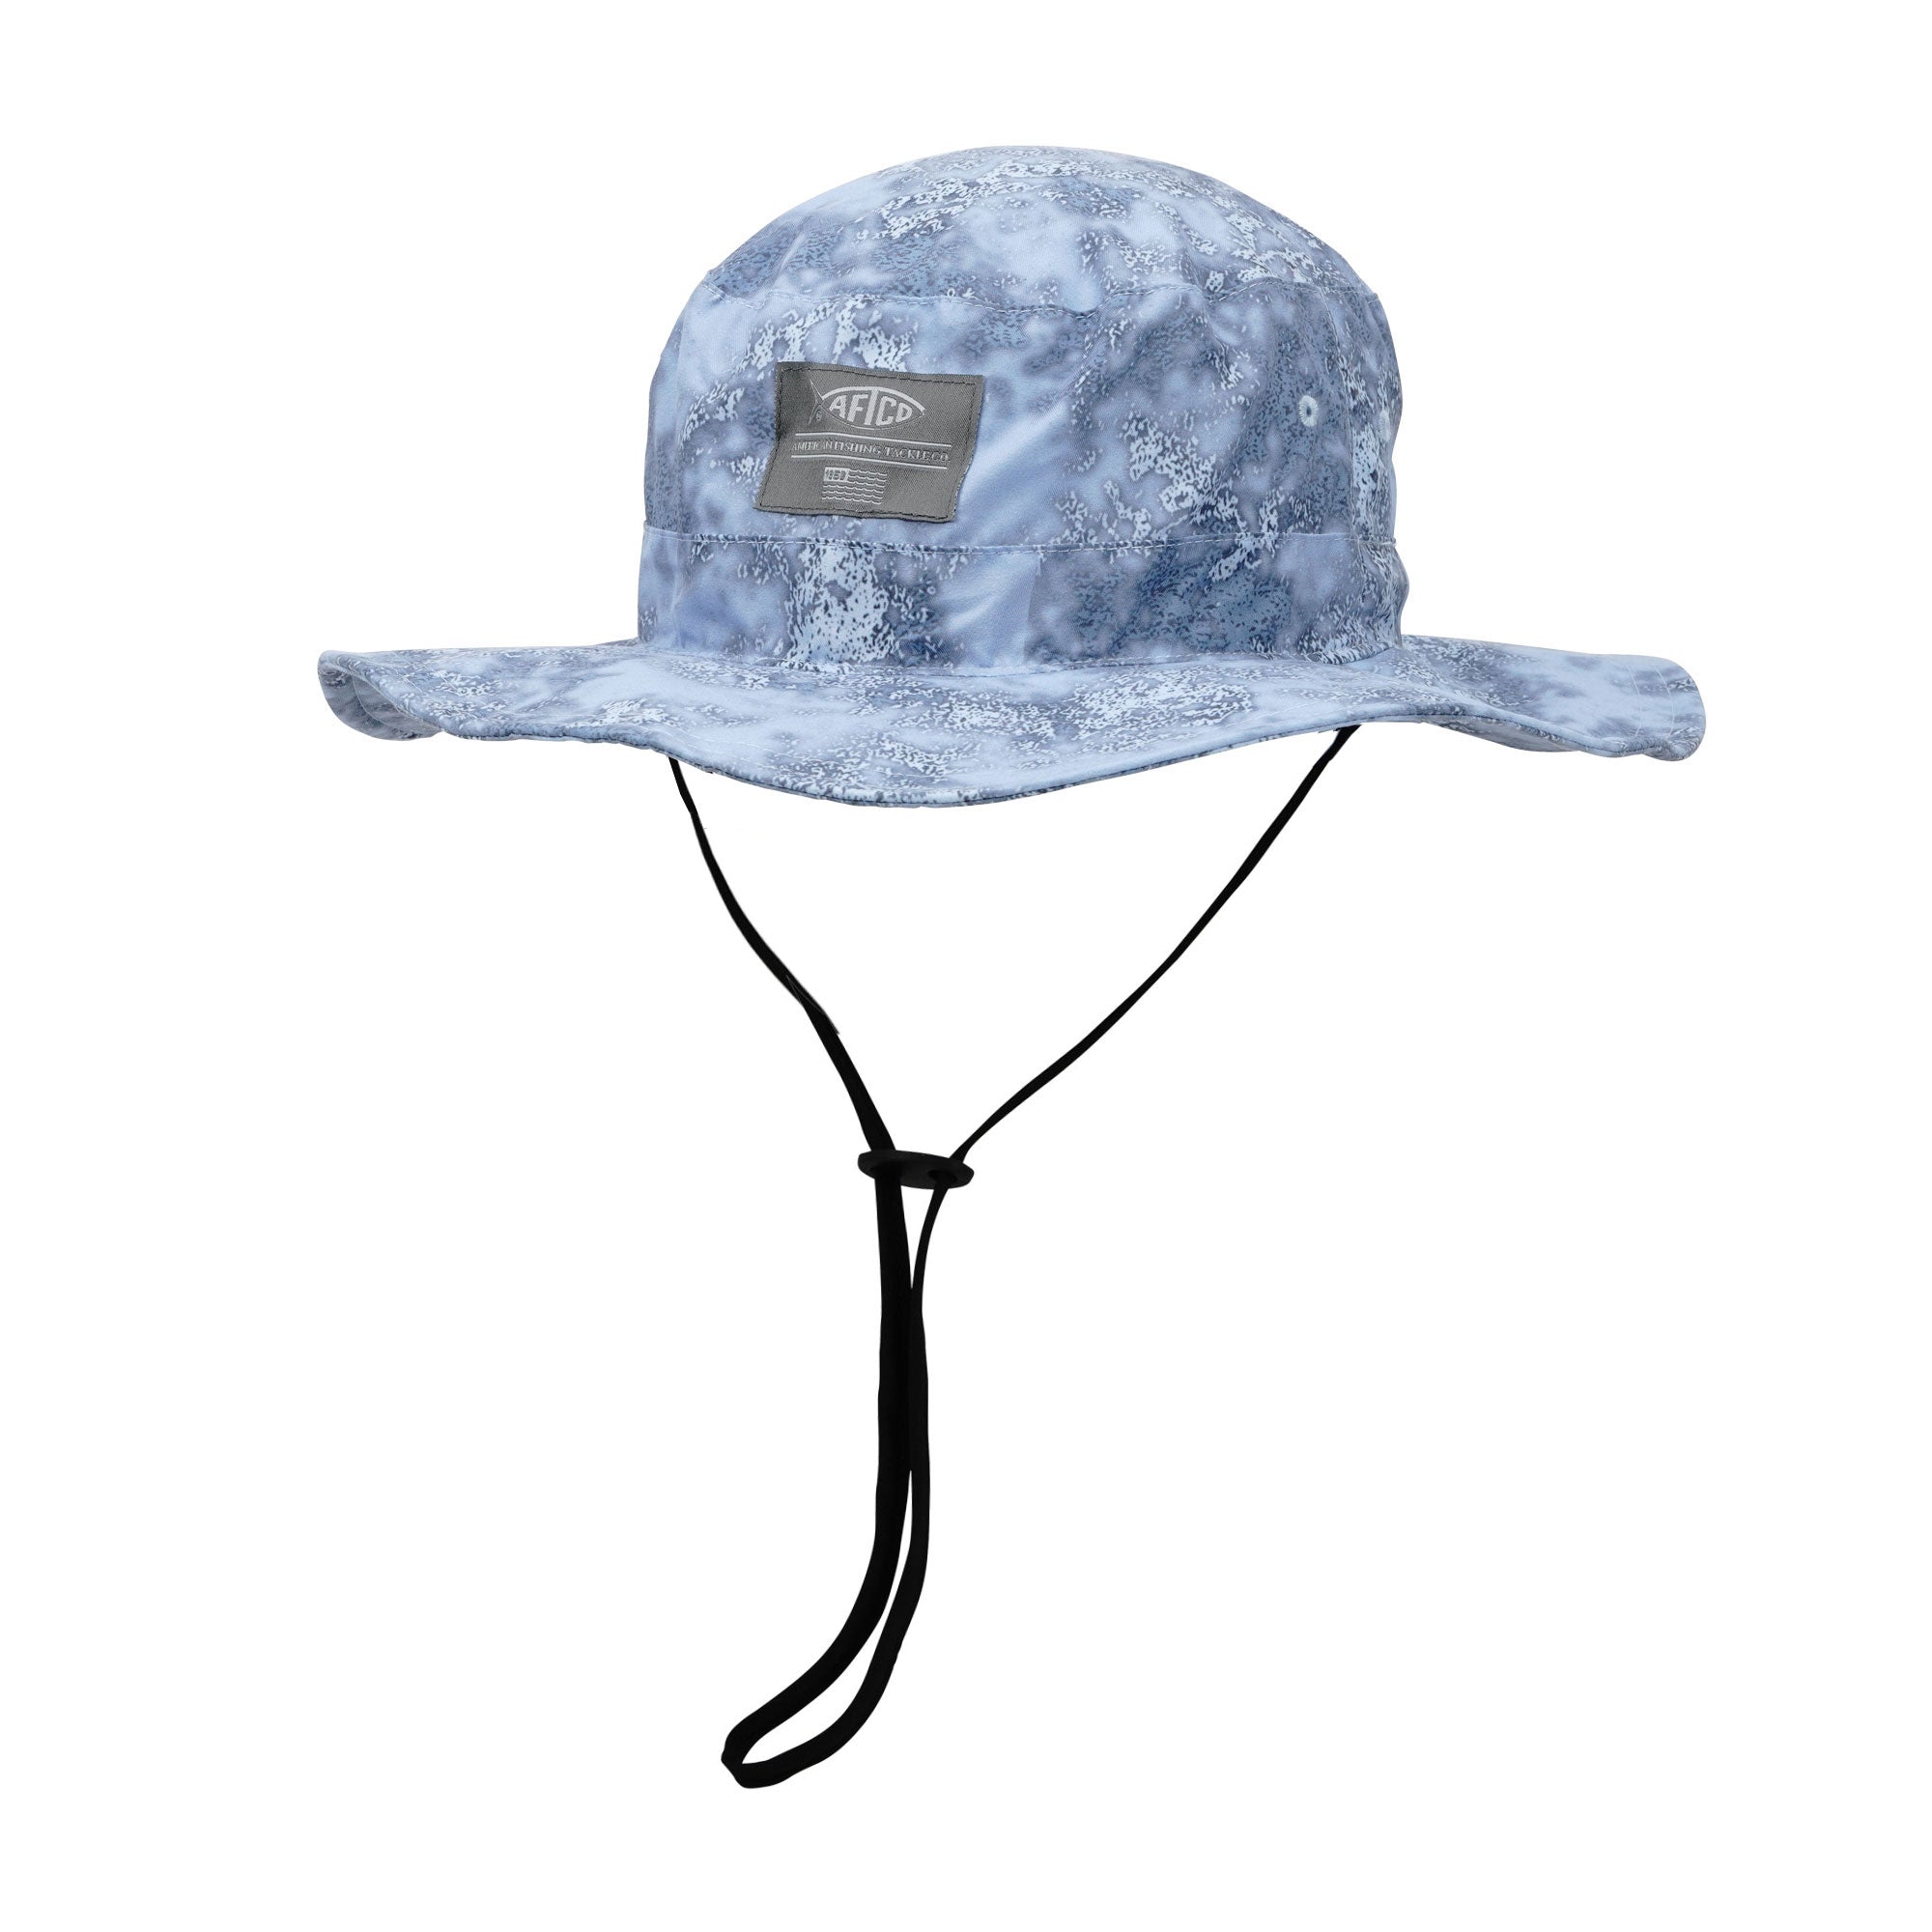 AFTCO Cast Boonie Hat Airy Blue Acid Camo